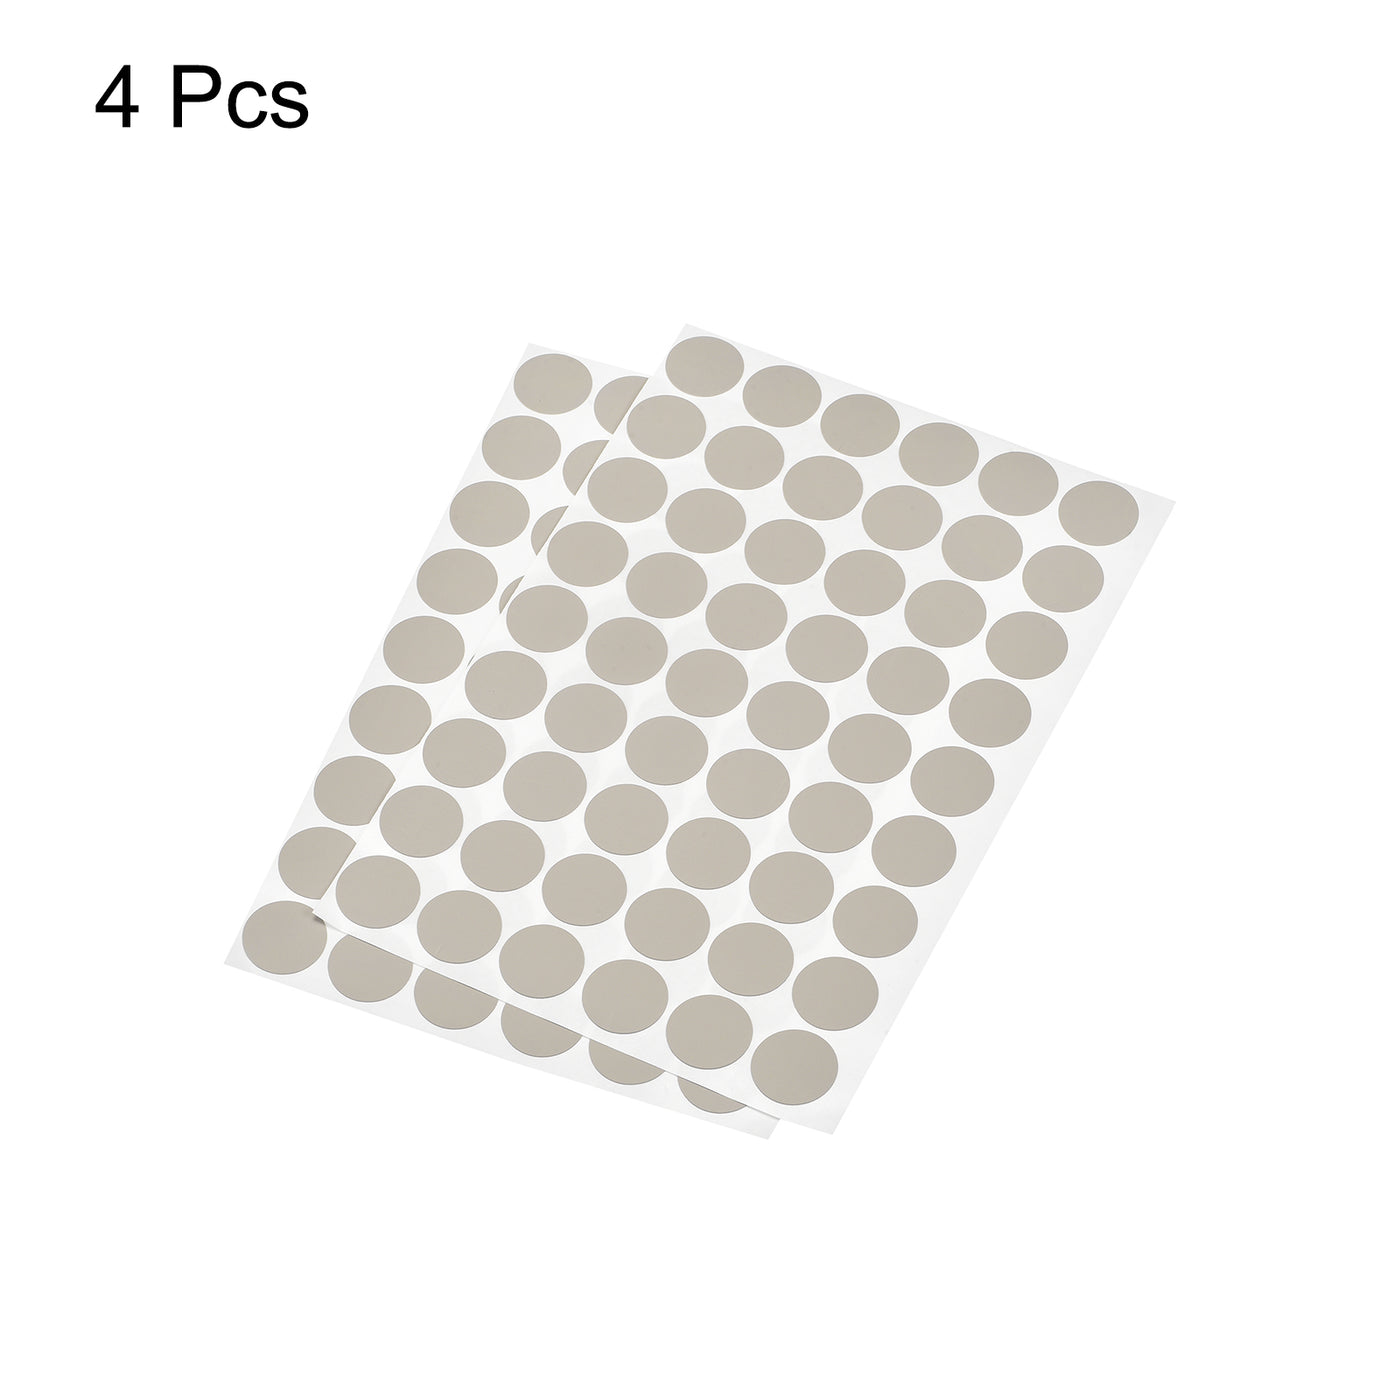 uxcell Uxcell Screw Hole Cover Stickers, 21mm Dia PVC Self Adhesive Covers Caps for Wood Furniture Cabinet Shelf Wardrobe, Gray 4 Sheet/216pcs